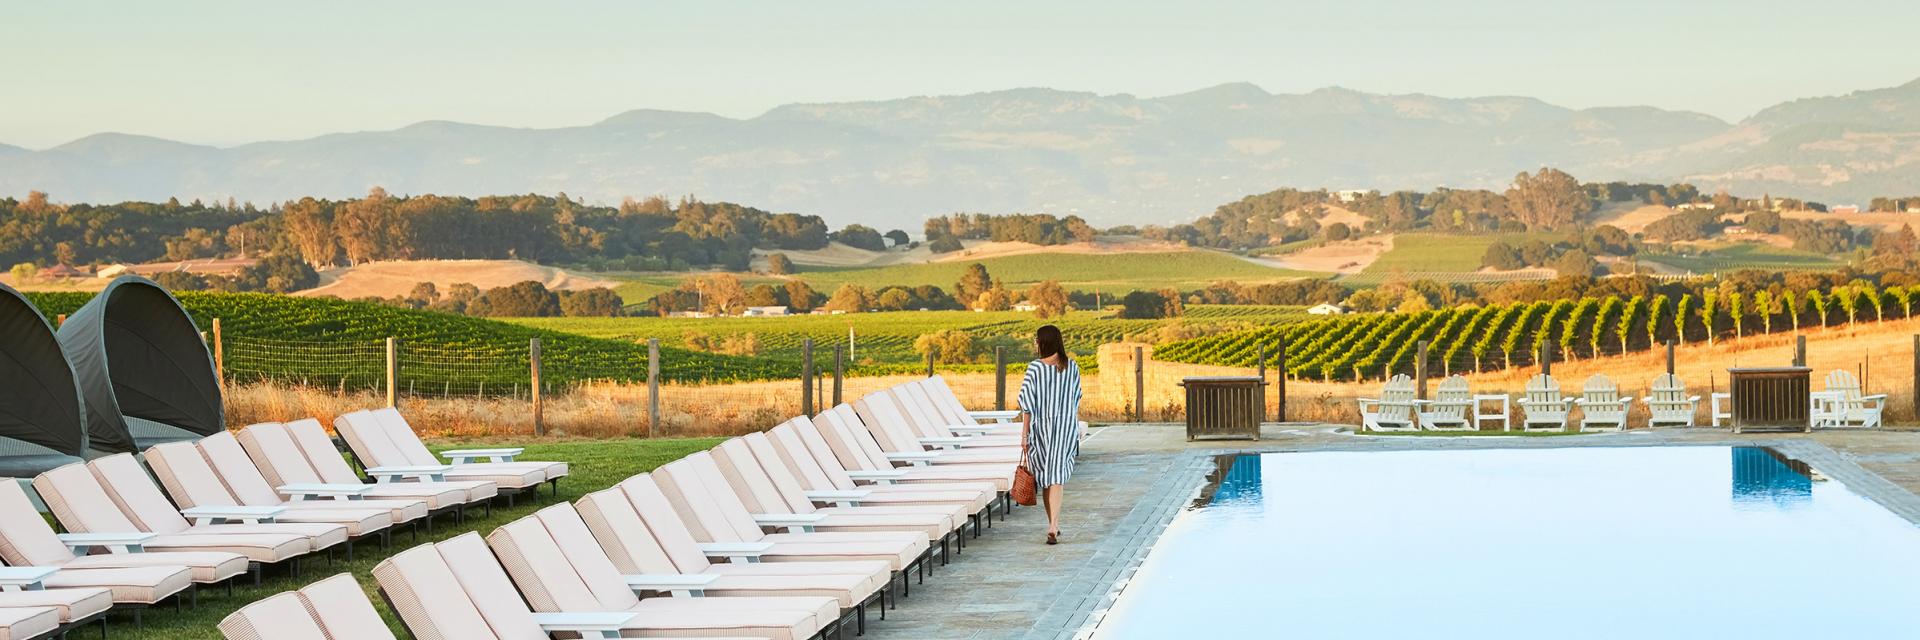 Poolside views of the surrounding wineries 